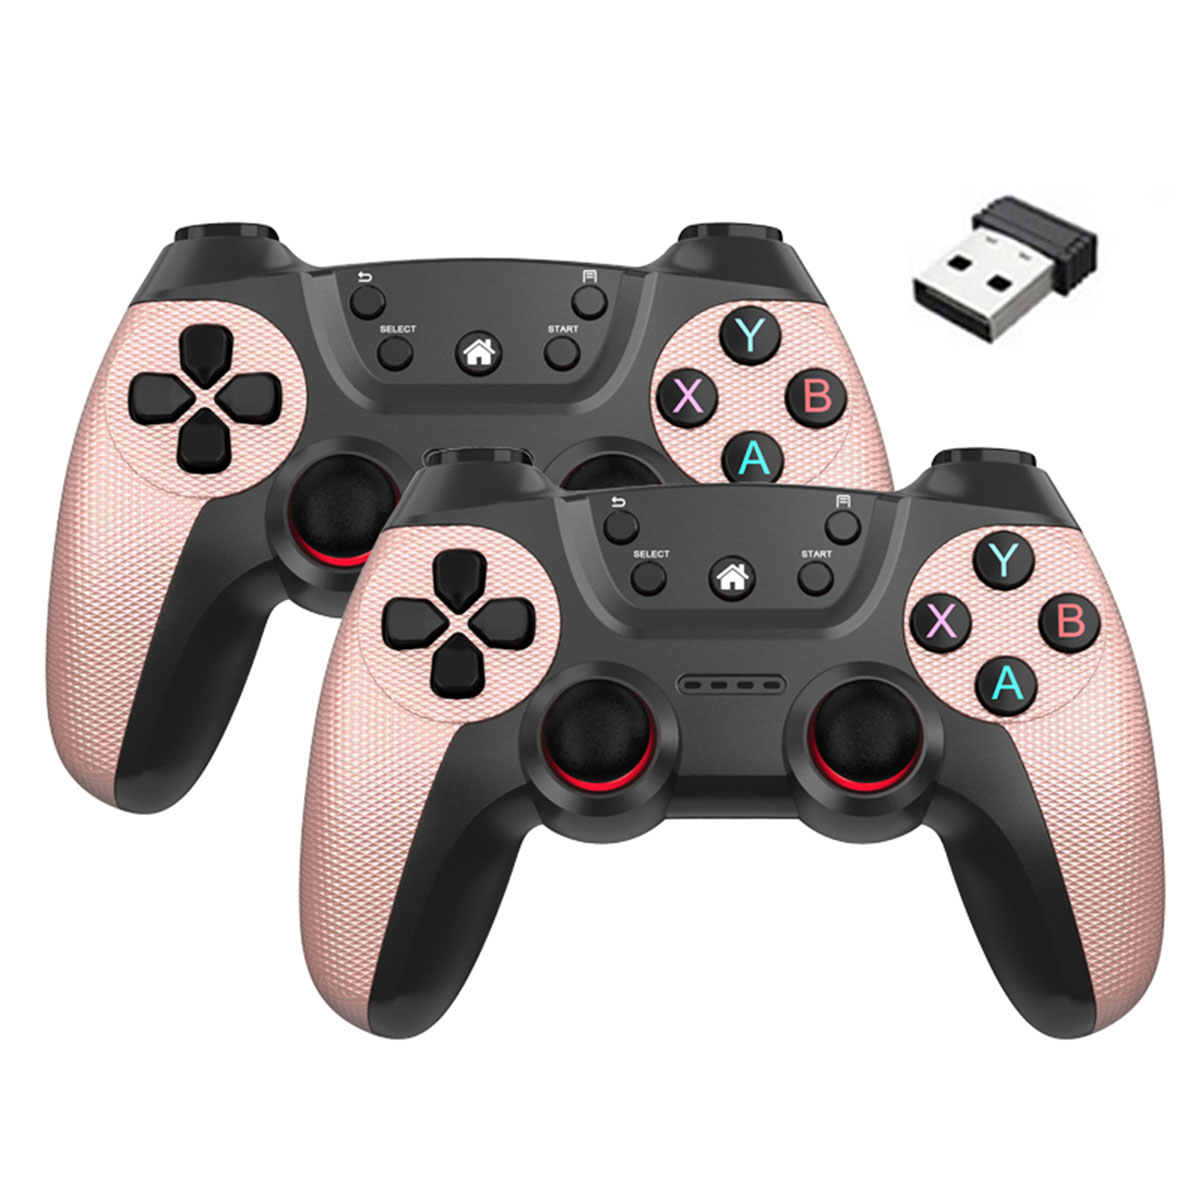 RESPIEL Doppeltes Wireless Gamepad,Android-Controller,Gamepad,2.4G,für PC,Android Rosenrosa Controller